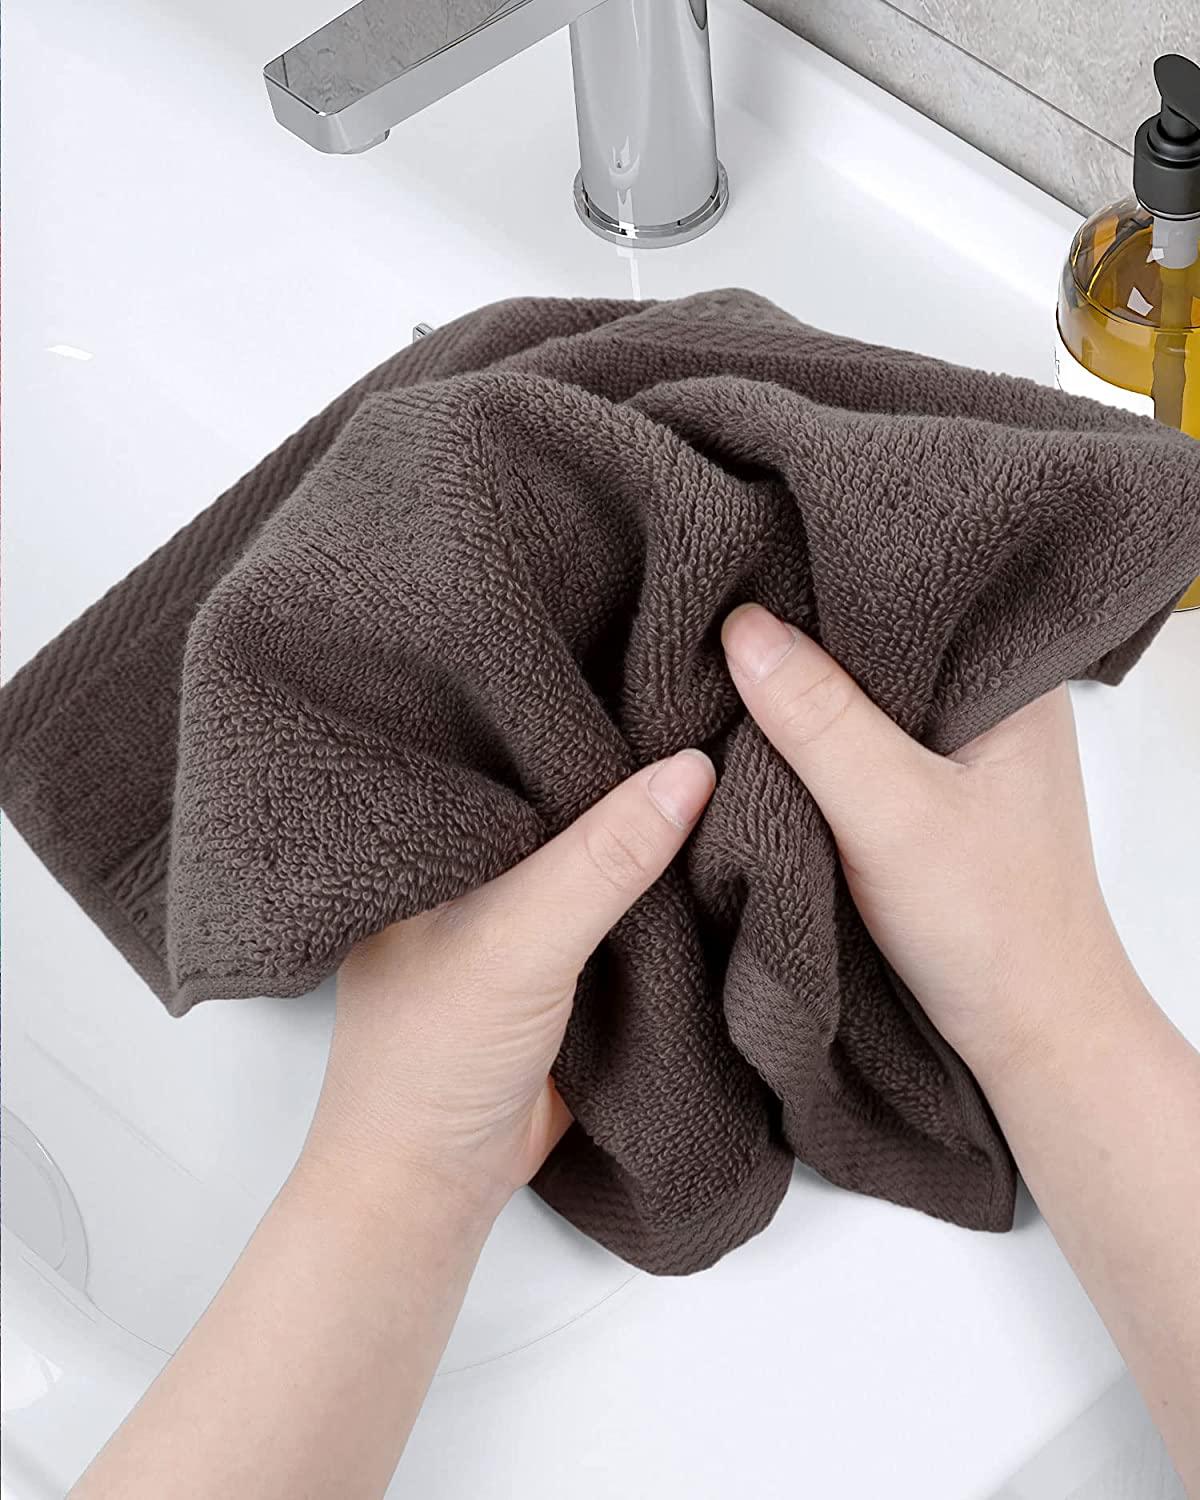 Cleanbear Cotton Hand Towel Set 6-Pack Ultra Soft Hand Towels with Assorted  Colors (13 x 29 Inches) Lightweight and Quick Dry Bathroom Towels